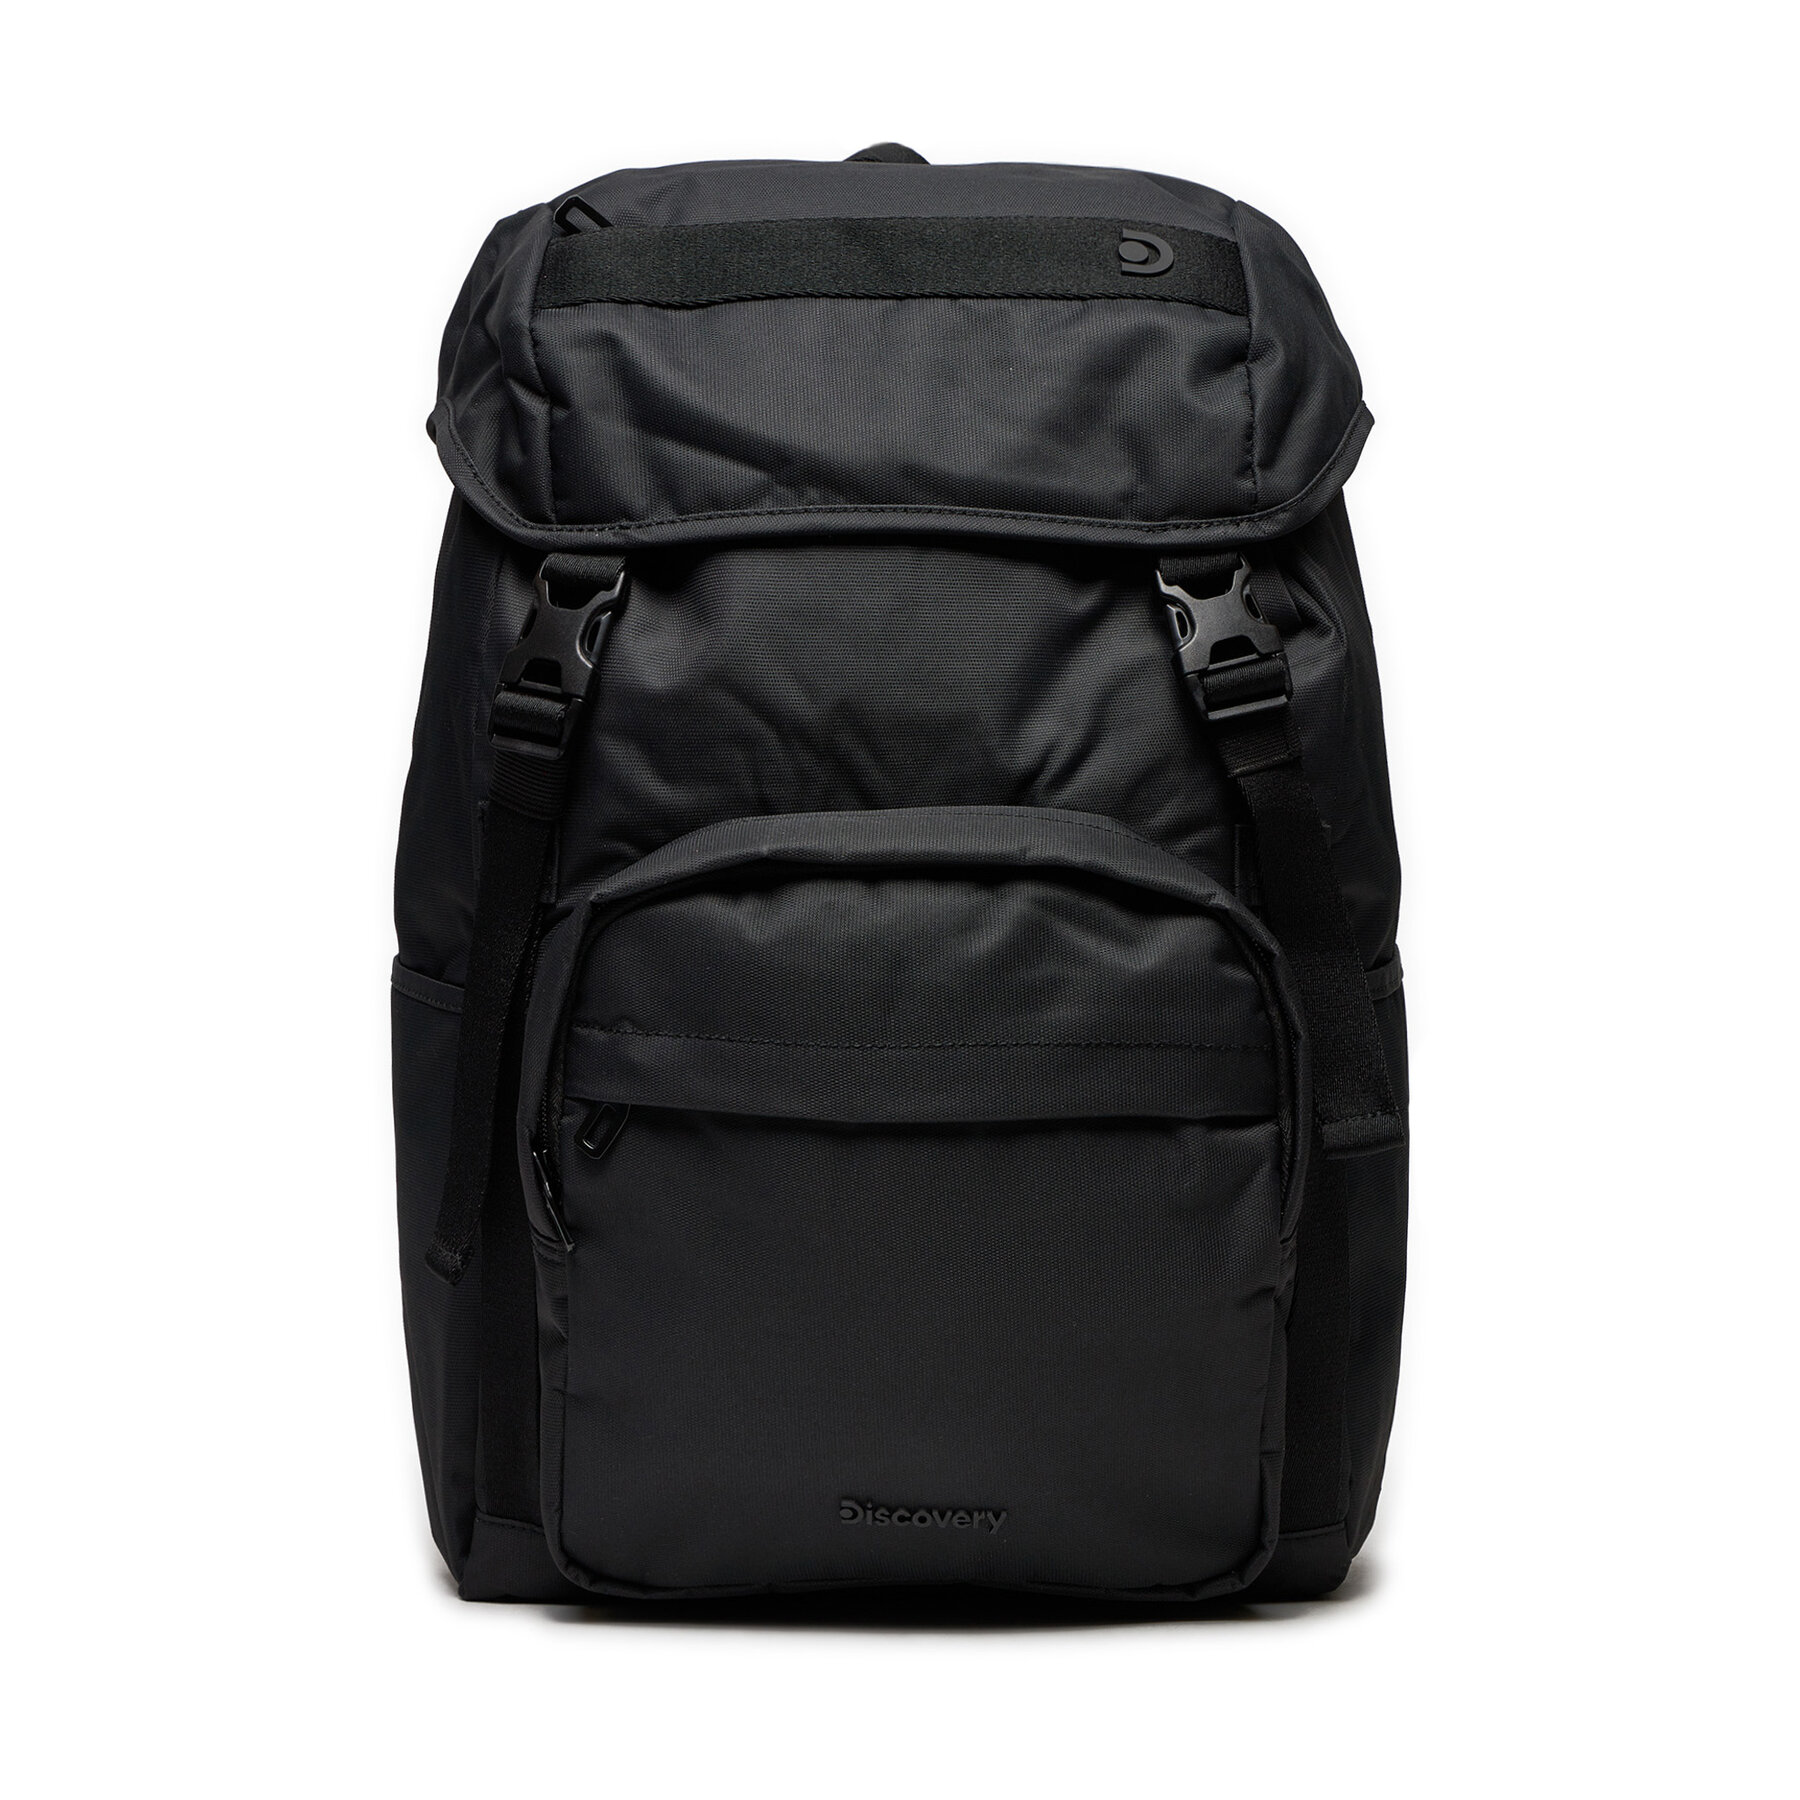 Rucksack Discovery Backpack D00943.06 Schwarz von Discovery